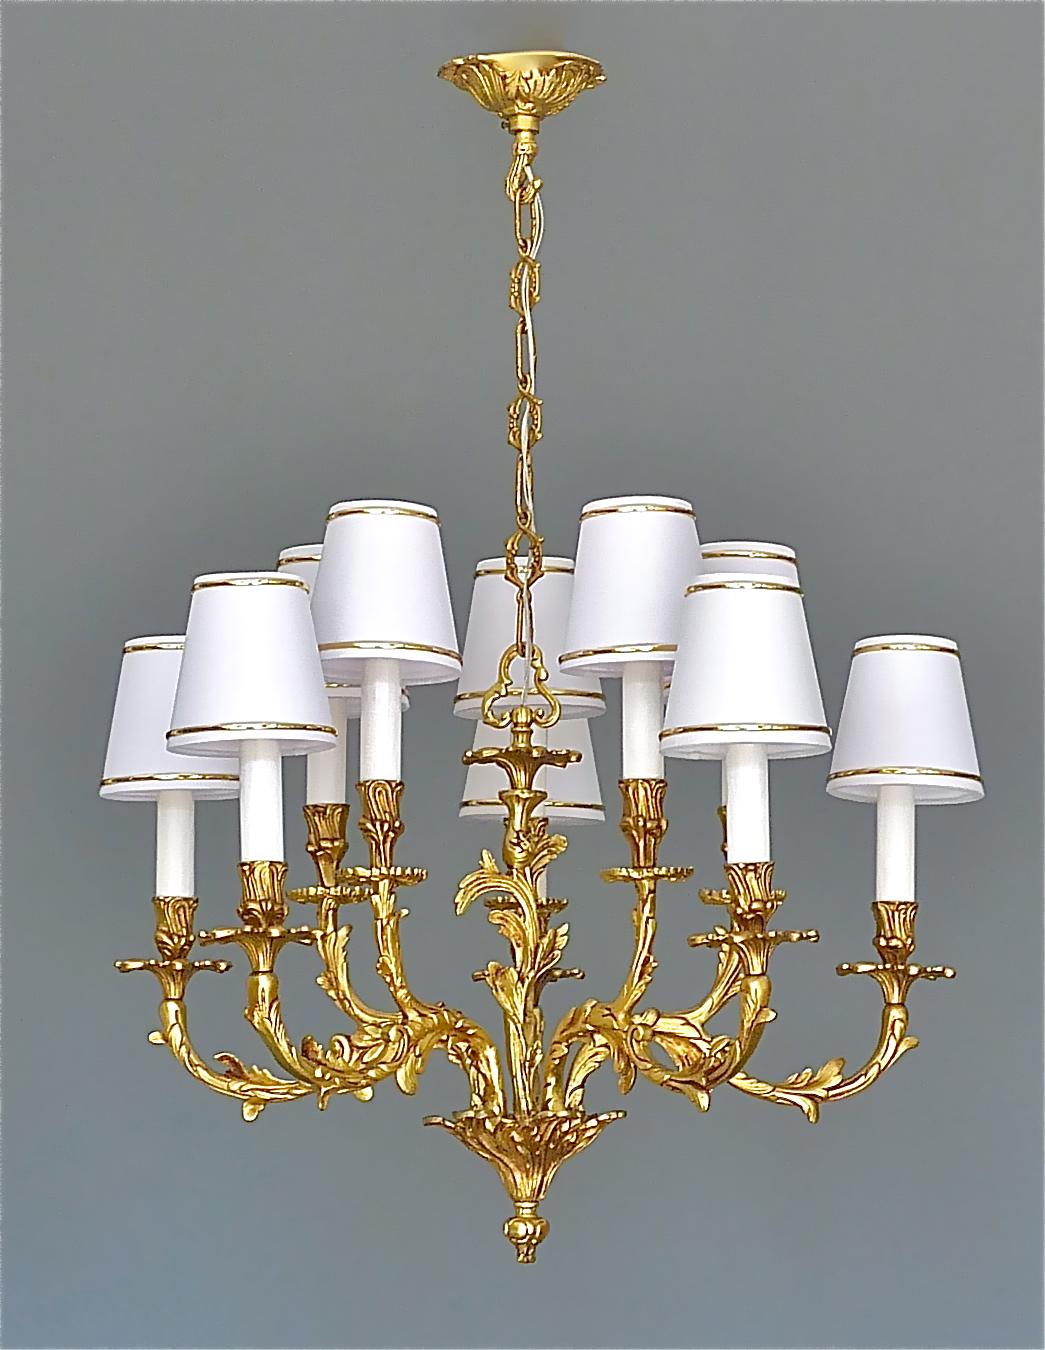 Amazing French Baroque Rococo style ten-light chandelier which can be dated to the second half of the 20th century and most possibly made by Maison Baguès, Paris in France. The wonderful manufactured chandelier is made of gilt bronze with new added